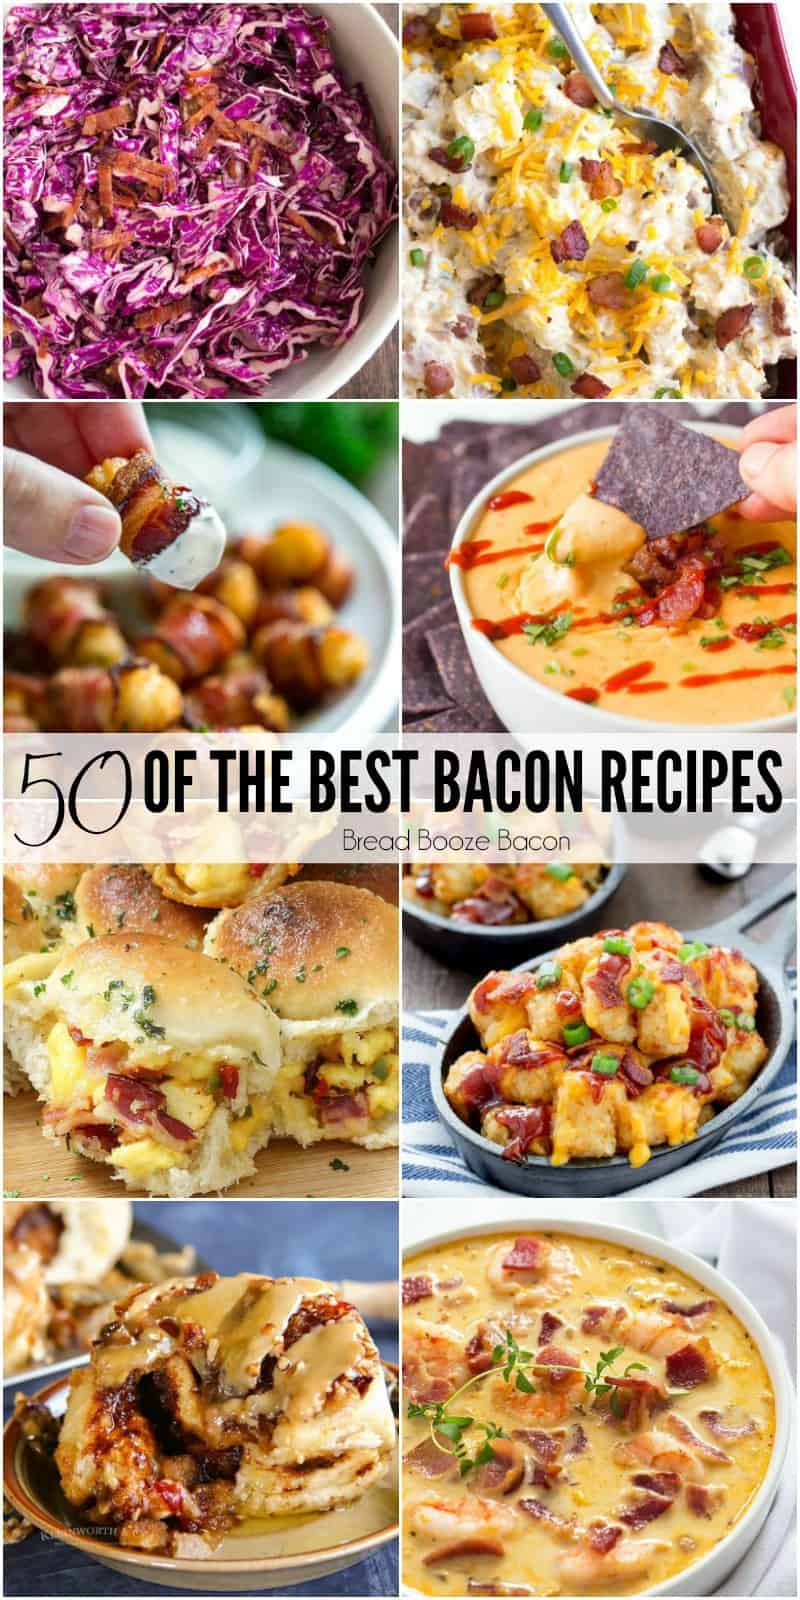 Grab your fat pants and get ready to drool! These are 50 of the Best Bacon Recipes and you are going to want seconds of everything!